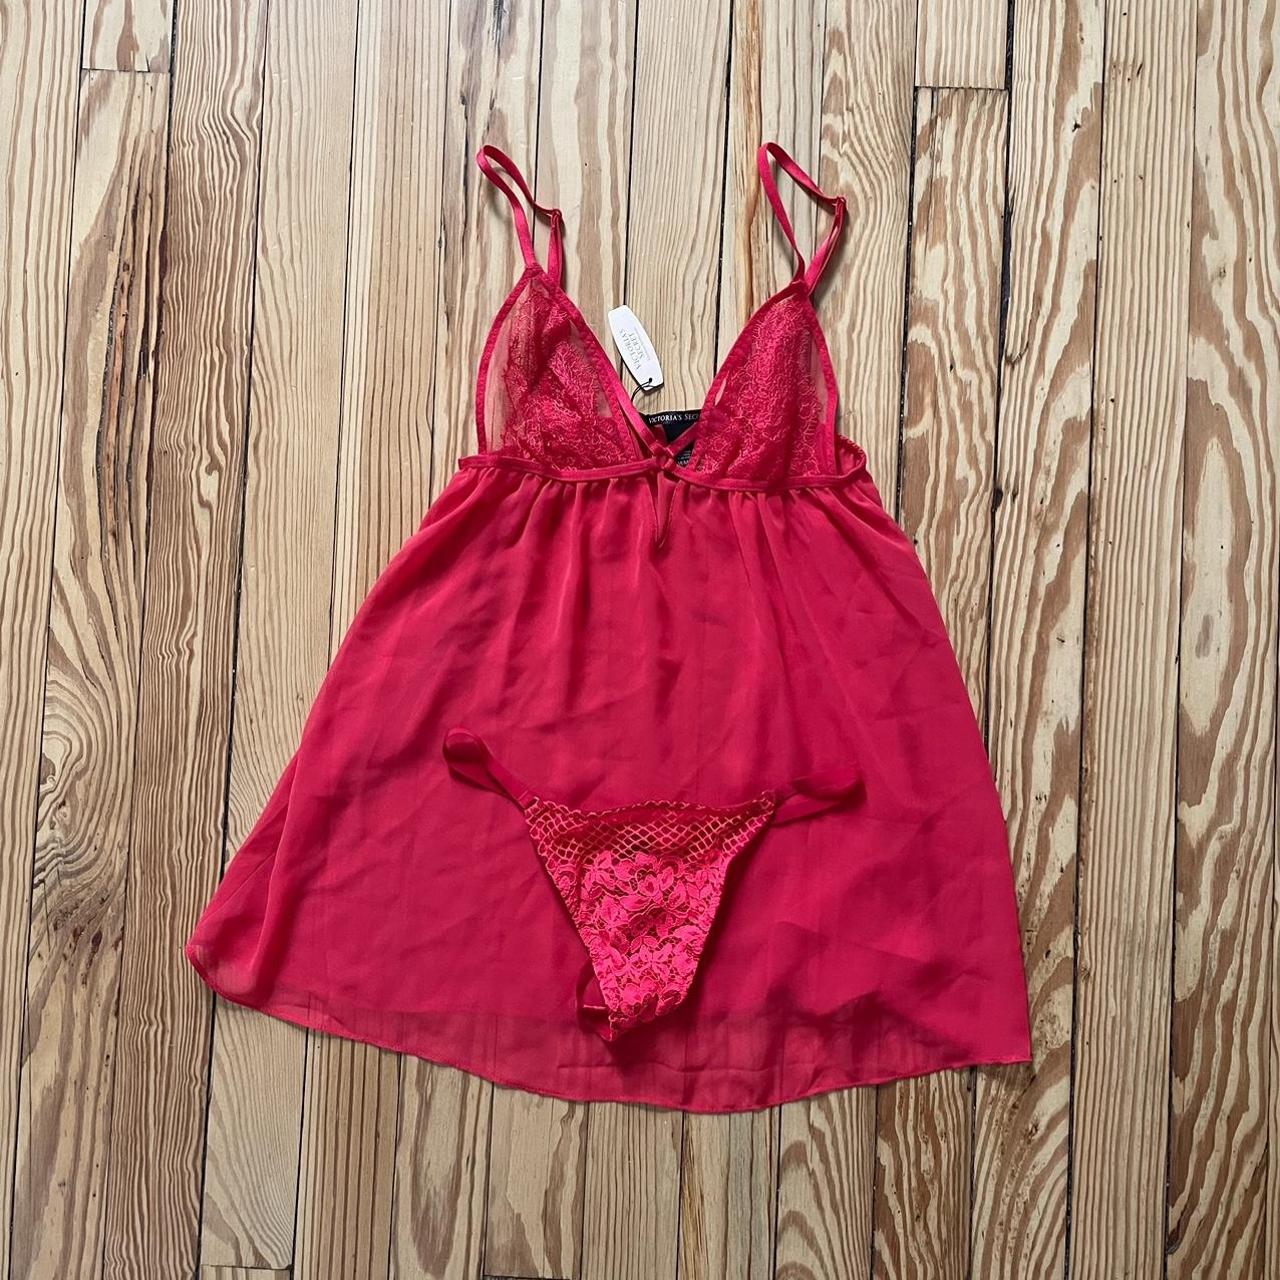 NWT VICTORIA’S SECRET PINK RED LACE PANTIES